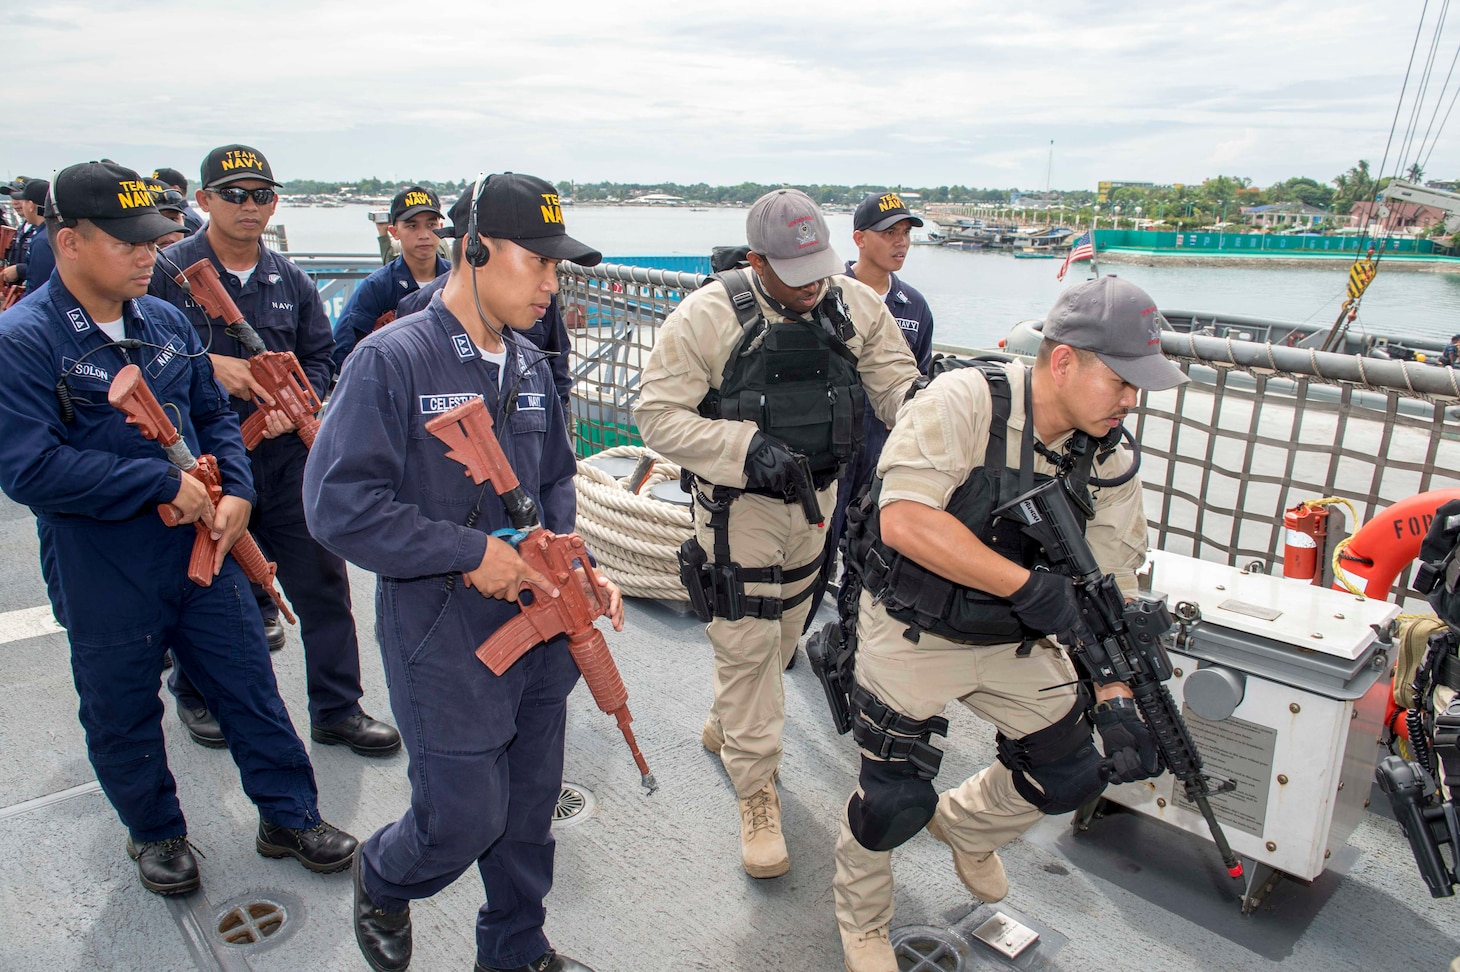 150623-N-MK881-205 PUERTO PRINCESA, Philippines (June 22, 2015) Sailors assigned to Surface Warfare Mission Package, Detachment 4, embarked aboard the littoral combat ship USS Fort Worth (LCS 3), practice visit, board, search and seizure drills with sailors from the Philippine navy during Cooperation Afloat Readiness and Training (CARAT) Philippines 2015. In its 21st year, CARAT is an annual, bilateral exercise series with the U.S. Navy, U.S. Marine Corps and the armed forces of nine partner nations. (U.S. Navy photo by Mass Communication Specialist 2nd Class Joe Bishop/Released) 